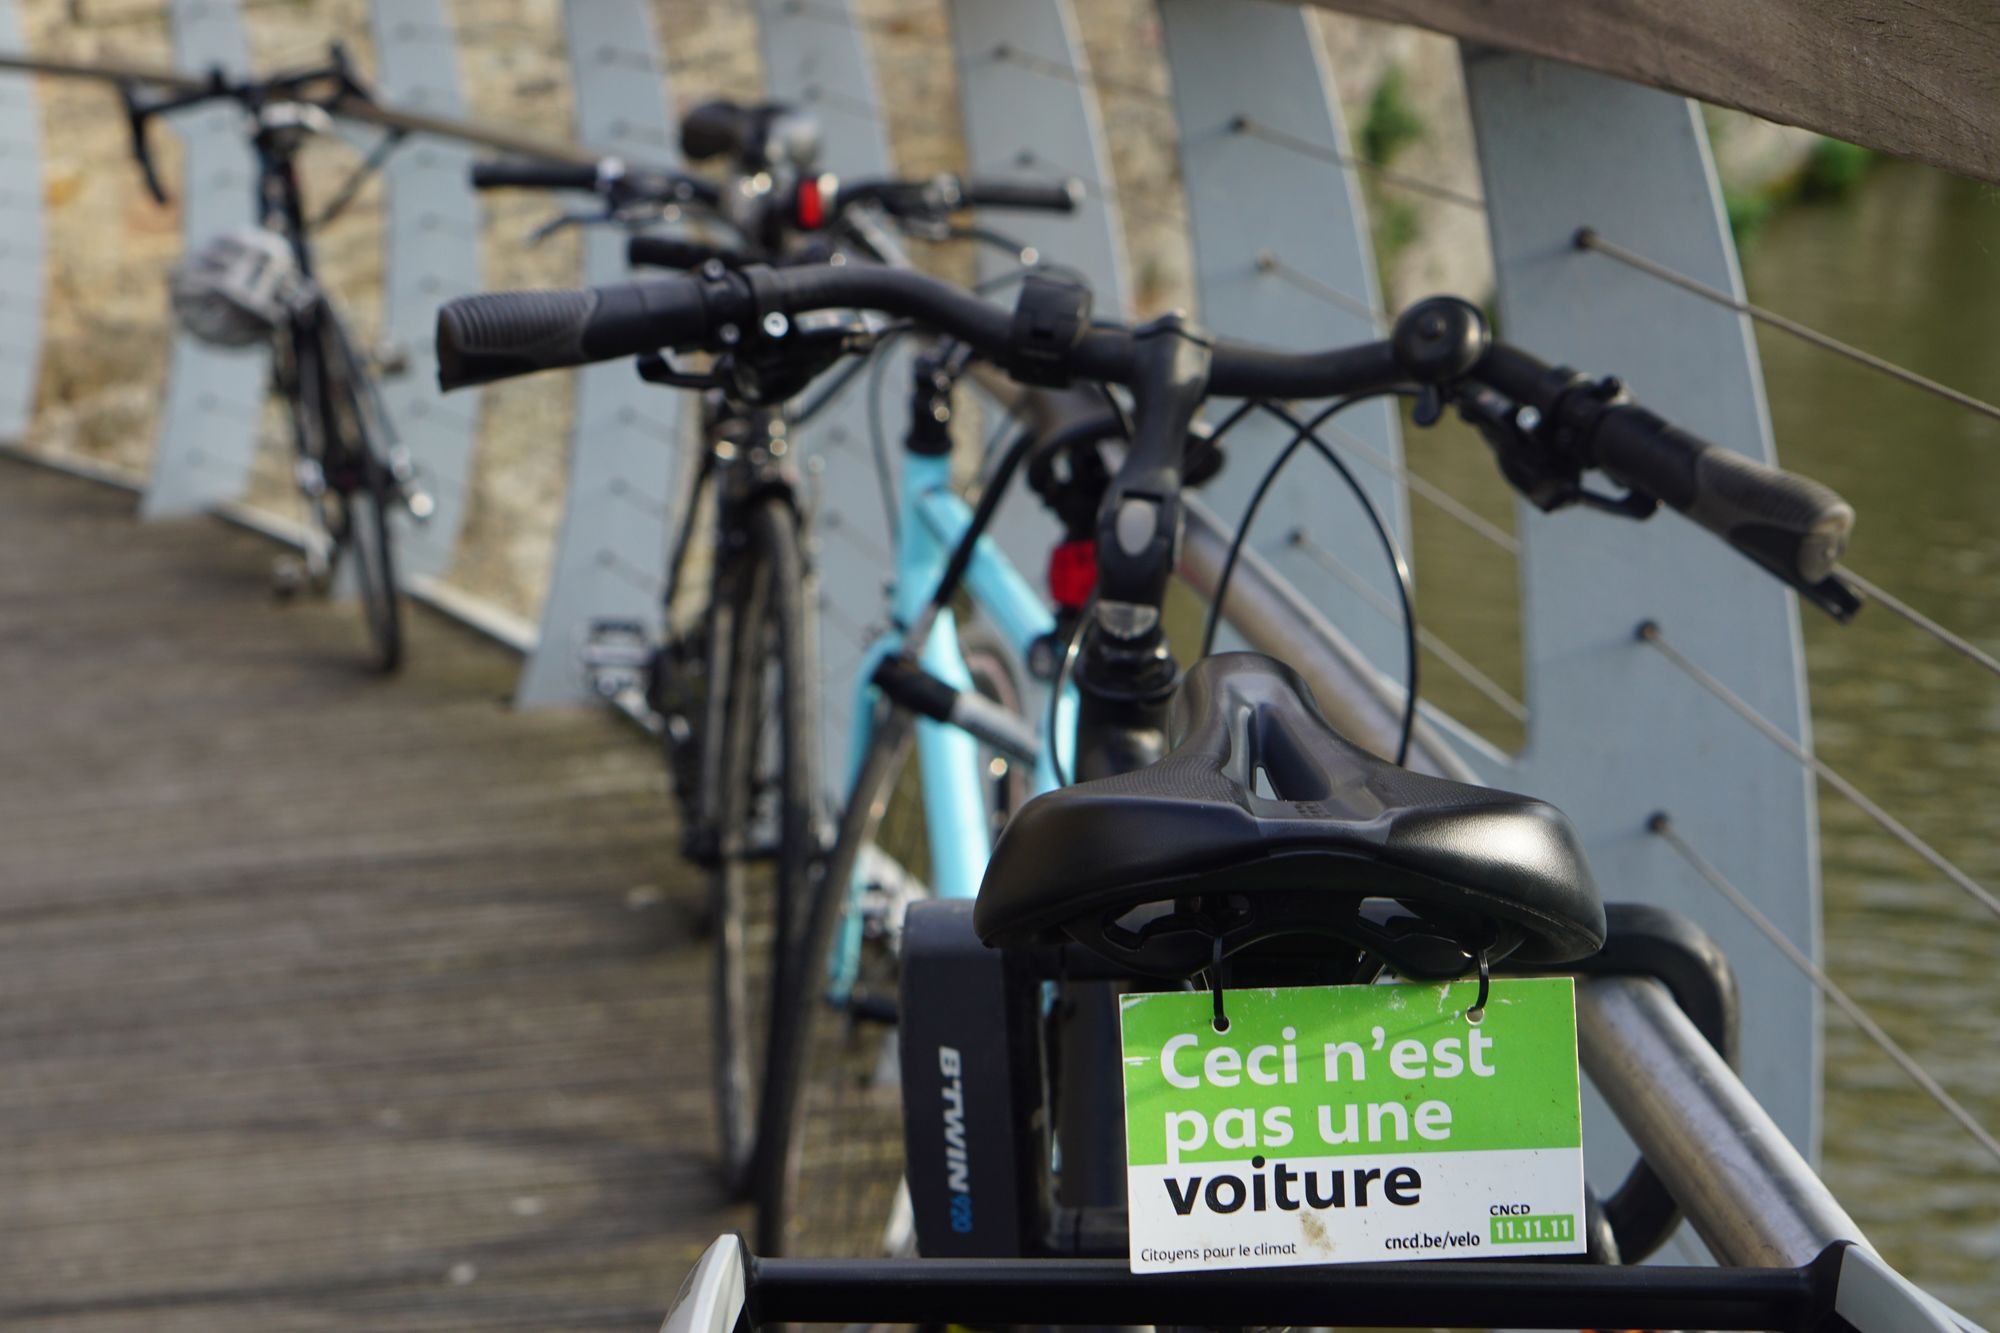 The rear saddle of a bicycle parked on a bridge with railings. Hanging from the saddle: "ceci n'est pas one voiture."